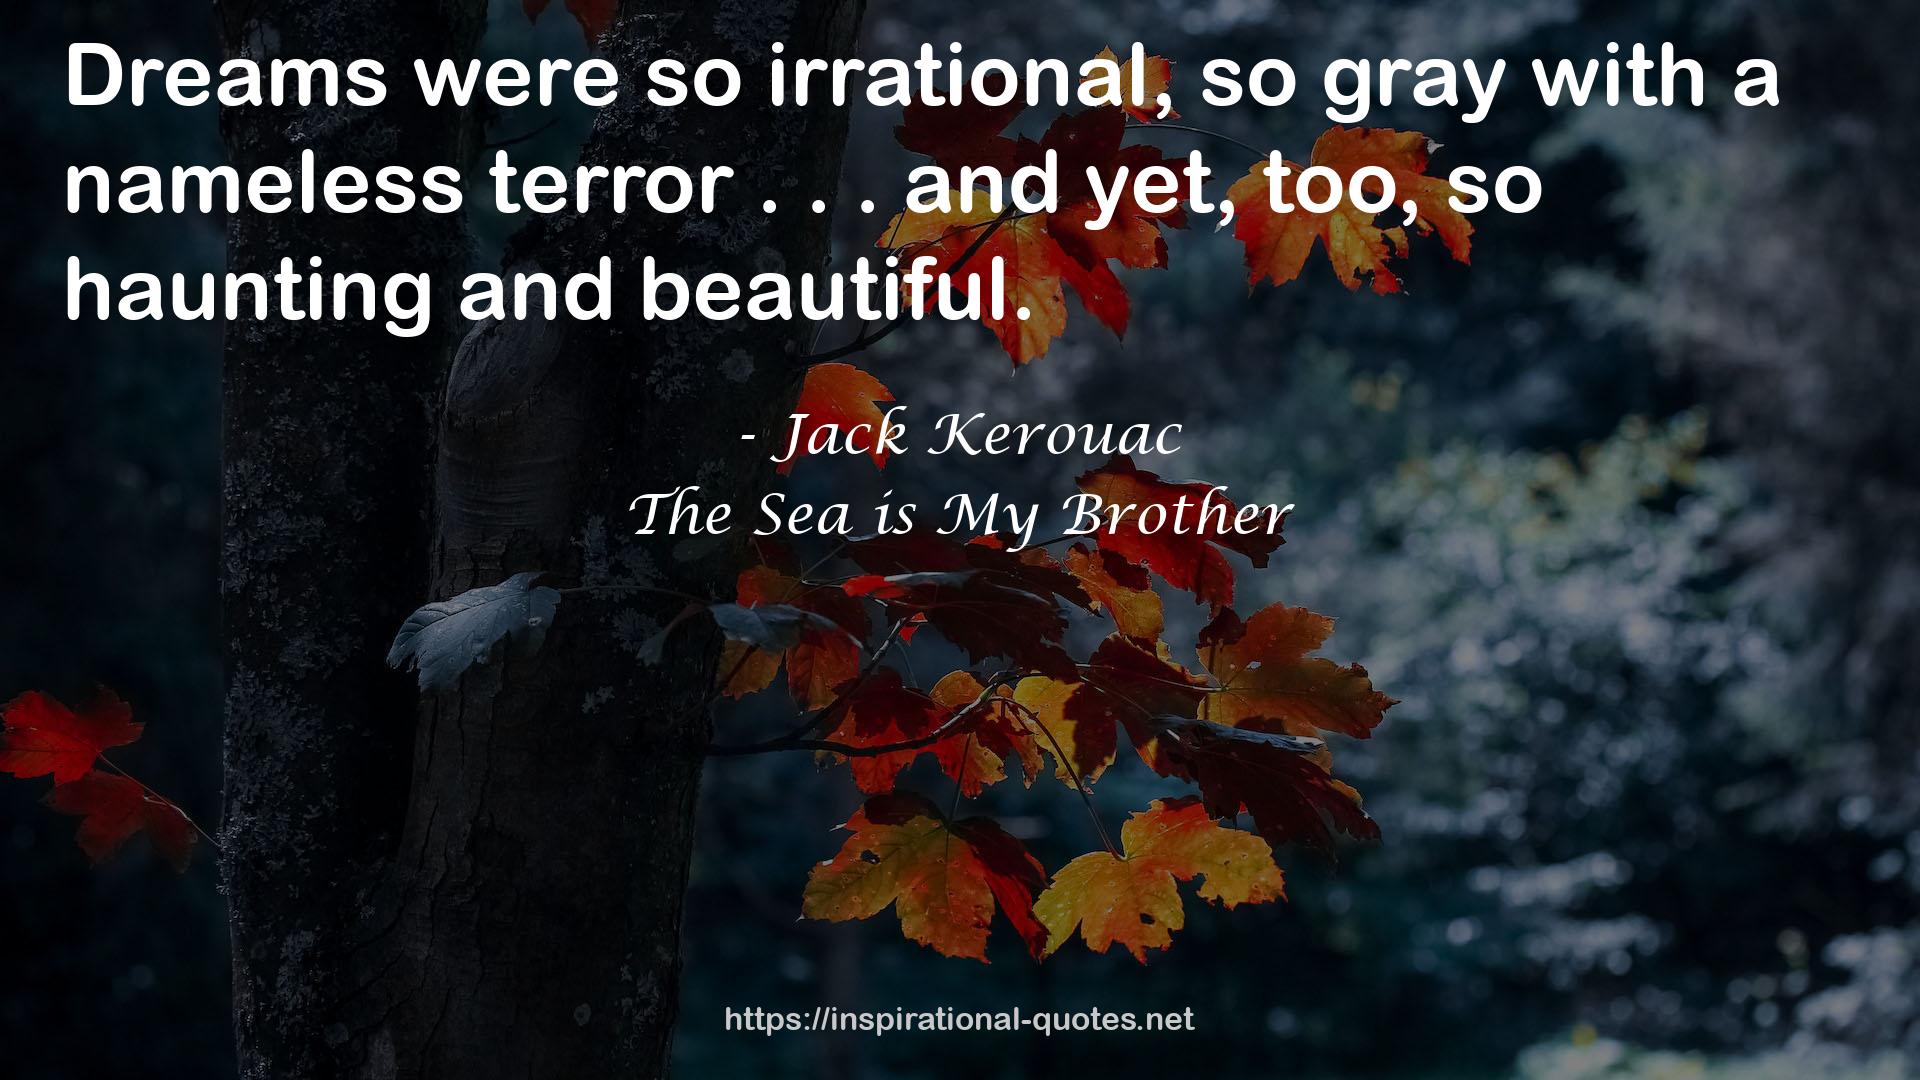 The Sea is My Brother QUOTES